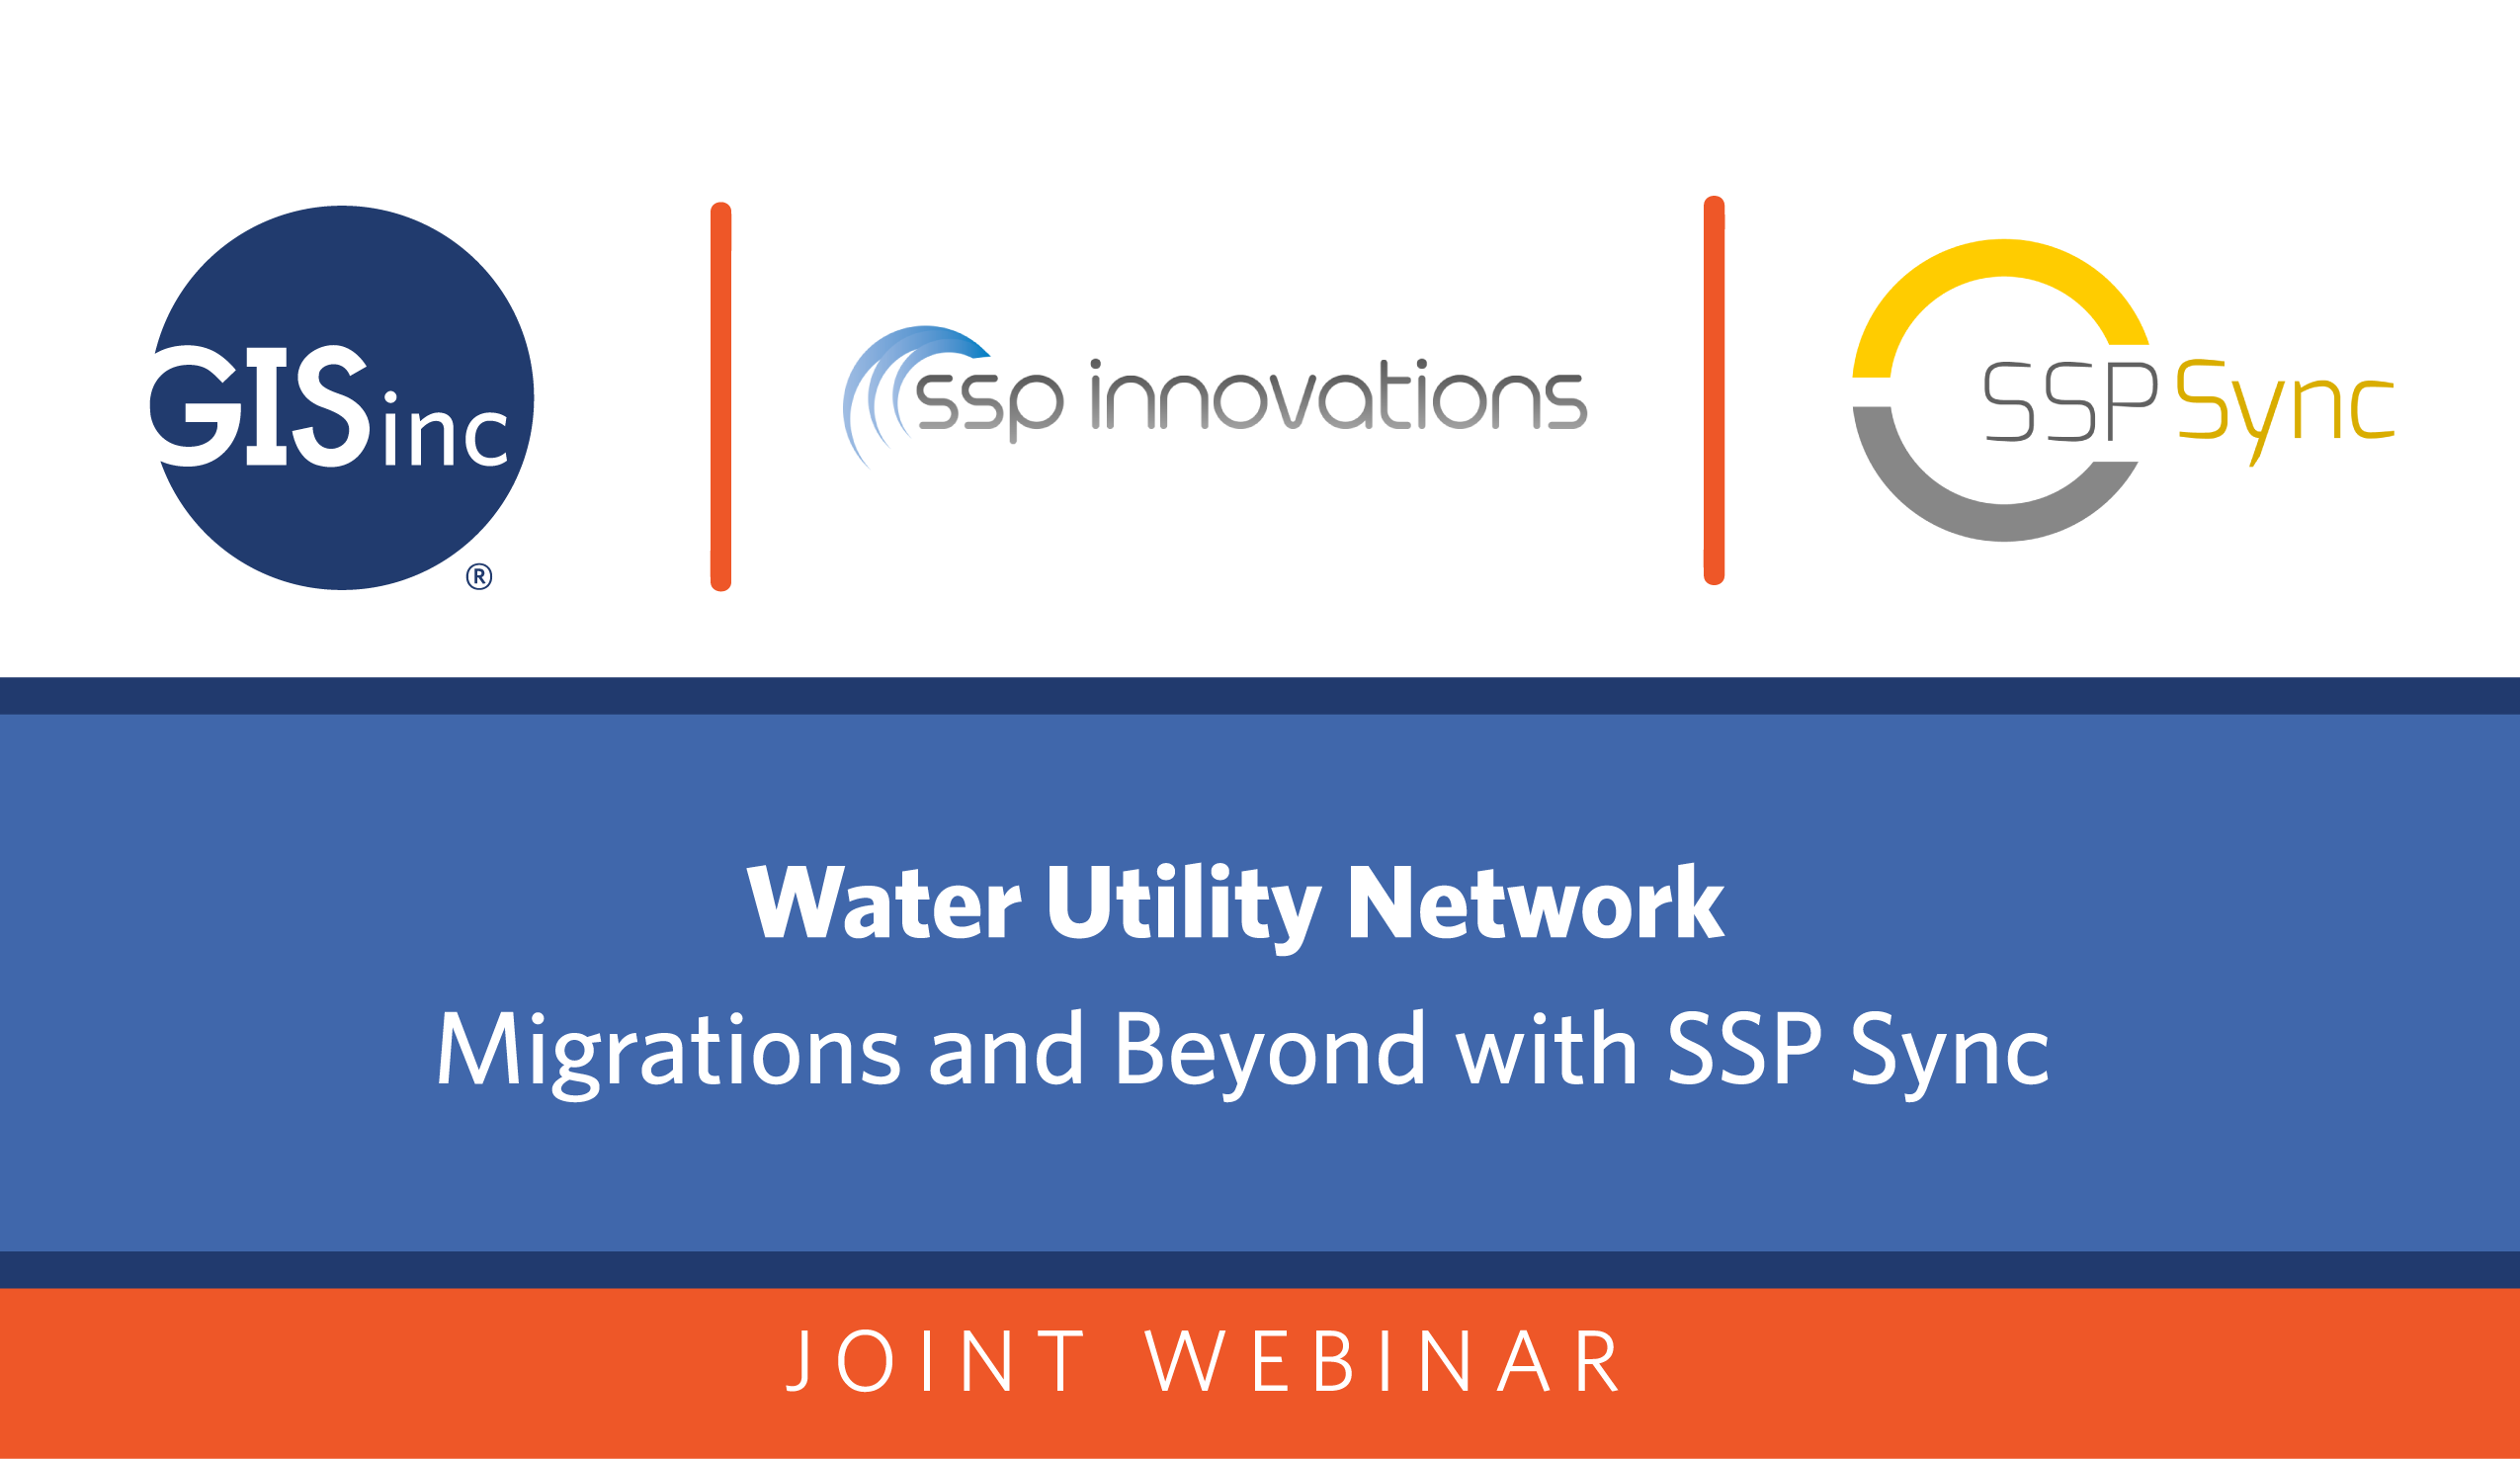 Esri Water Utility Network Migrations with SSP Sync - Questions Answered